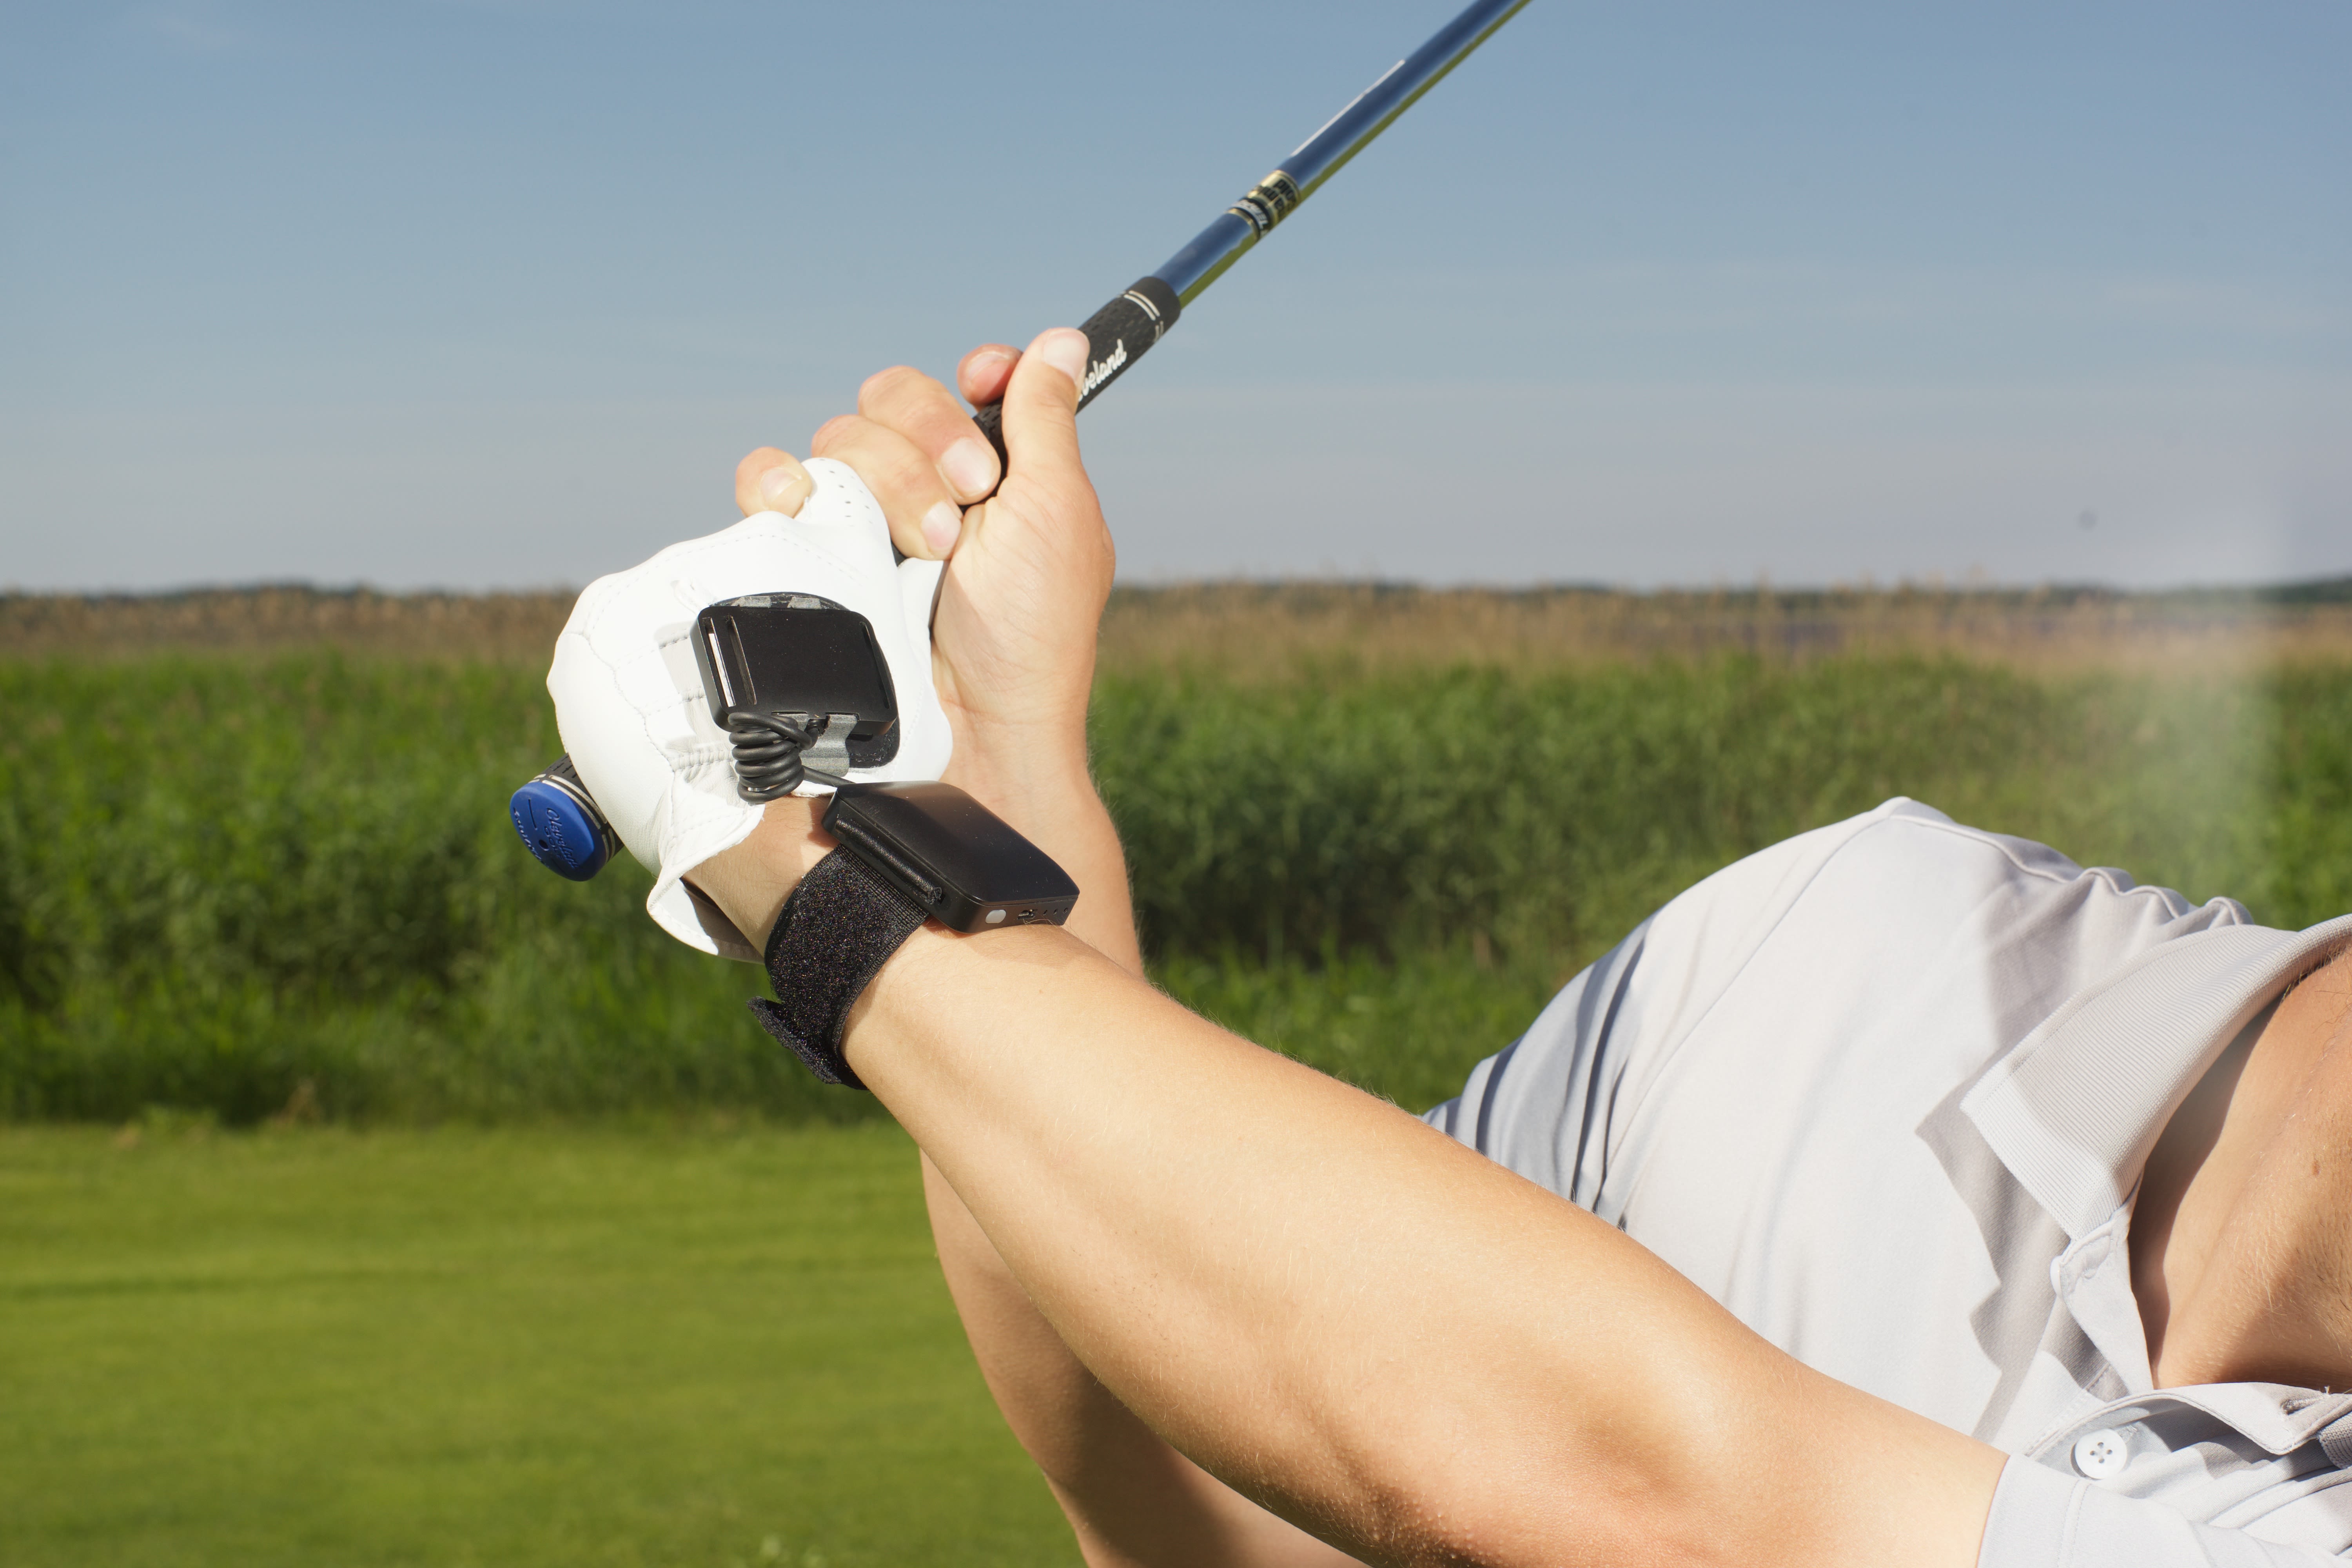 Sportsbox AI provides 3D motion analysis of your golf swing